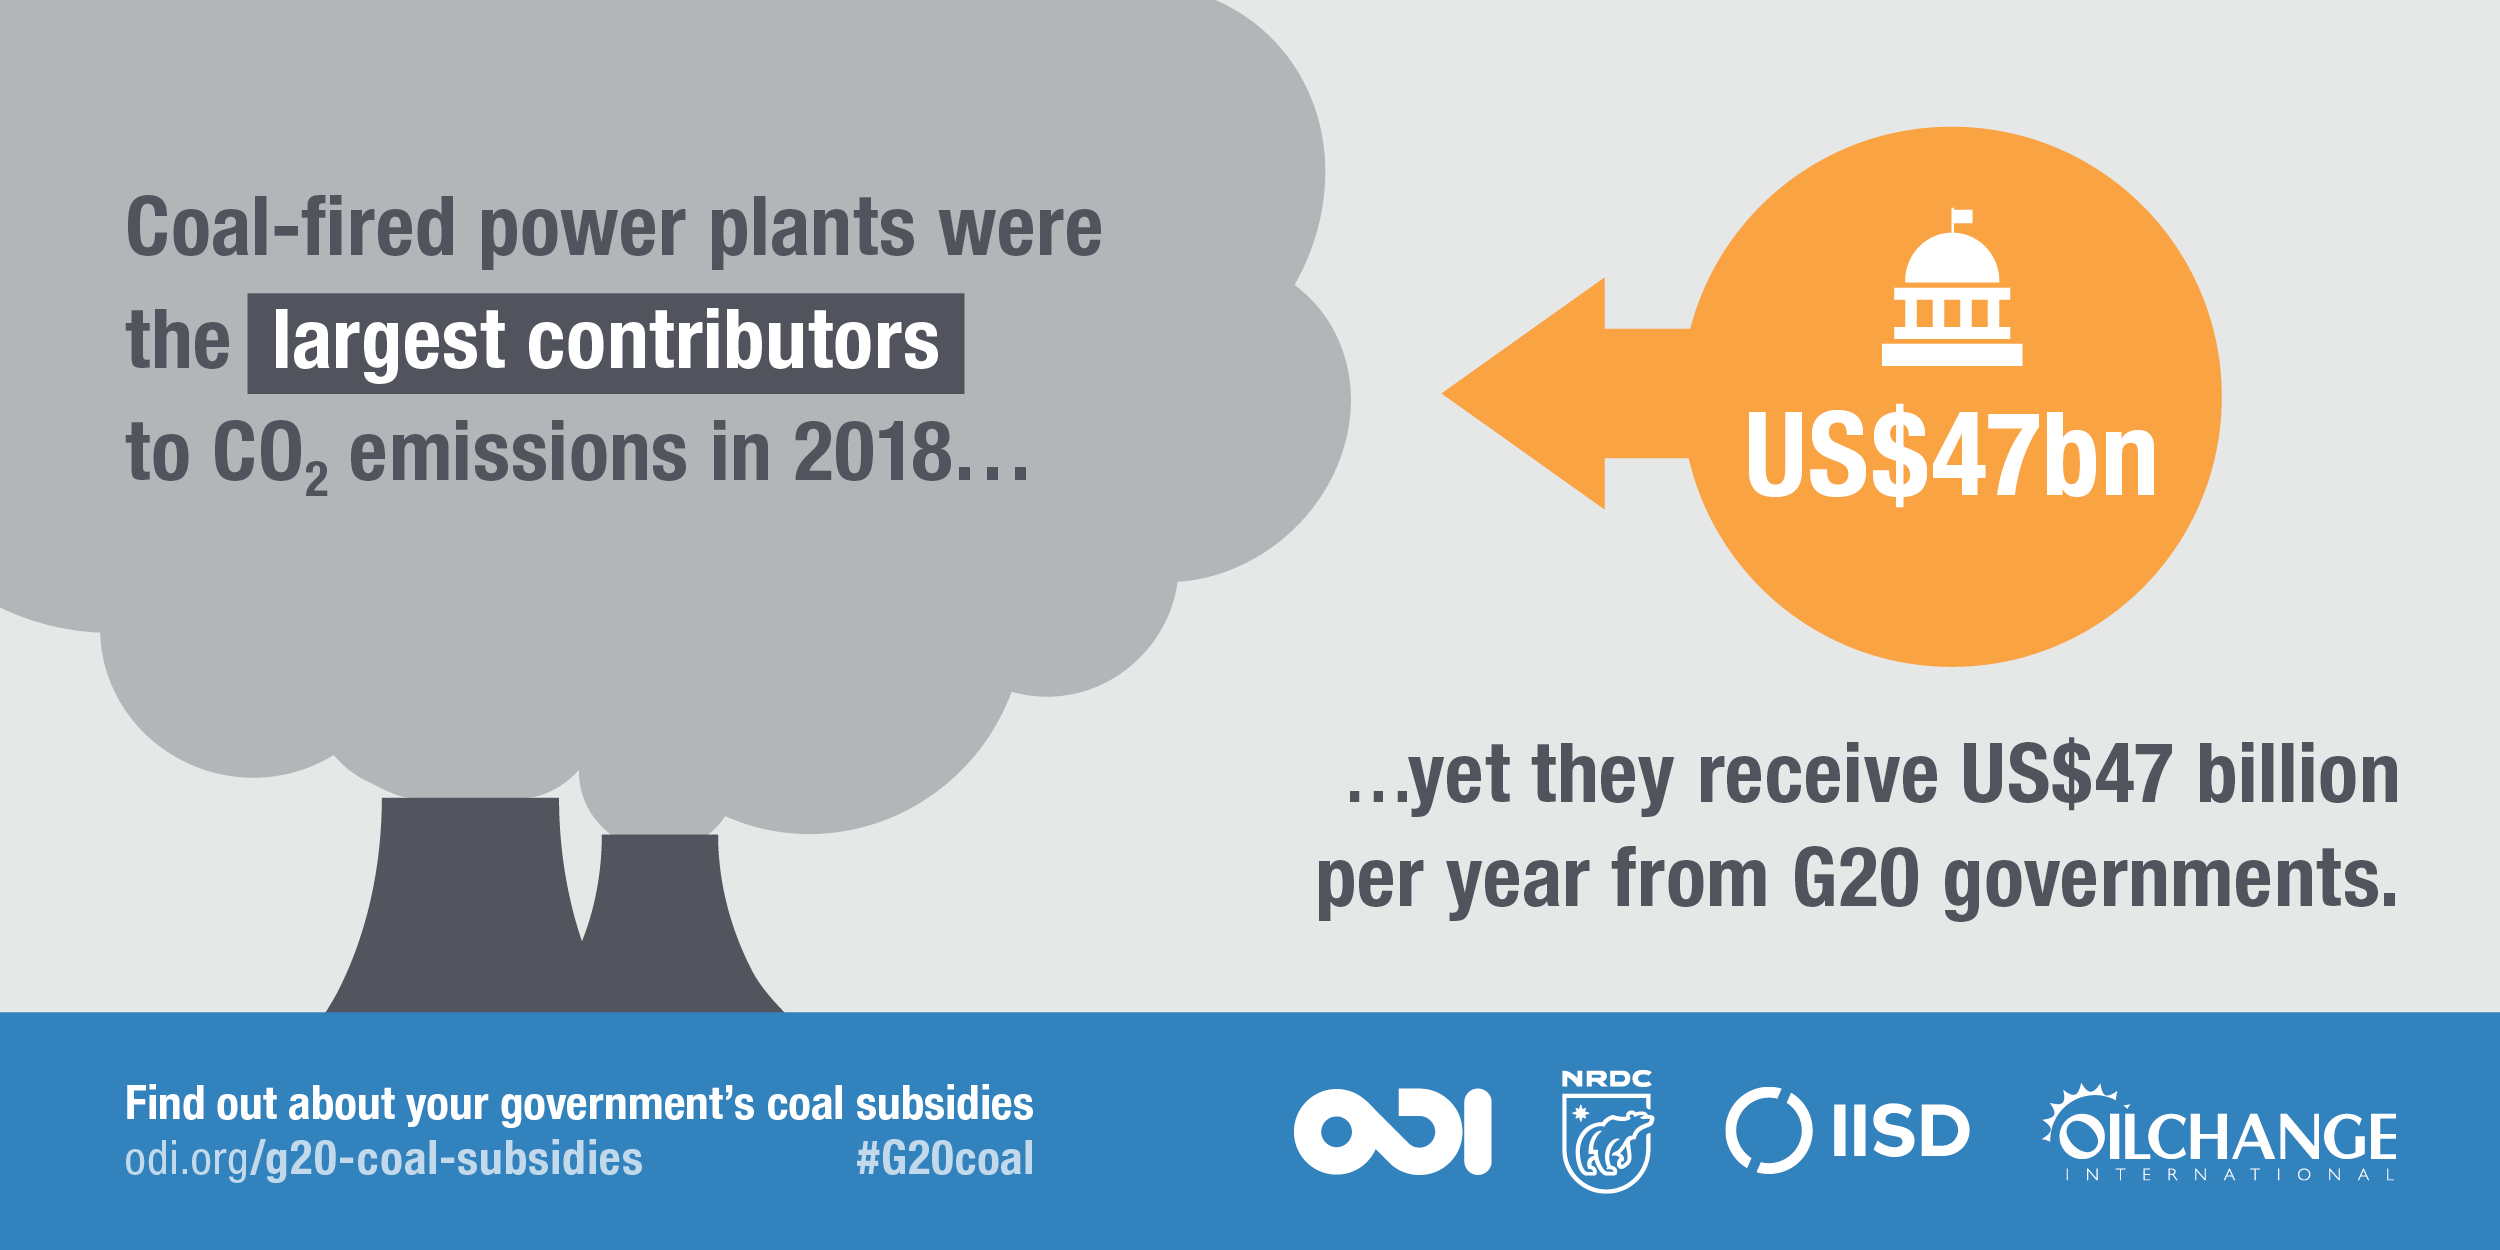 Coal-fired power plants were the largest contributors to CO2 emissions in 2018 yet they receive US$47 billion per year from G20 governments. Image: ODI